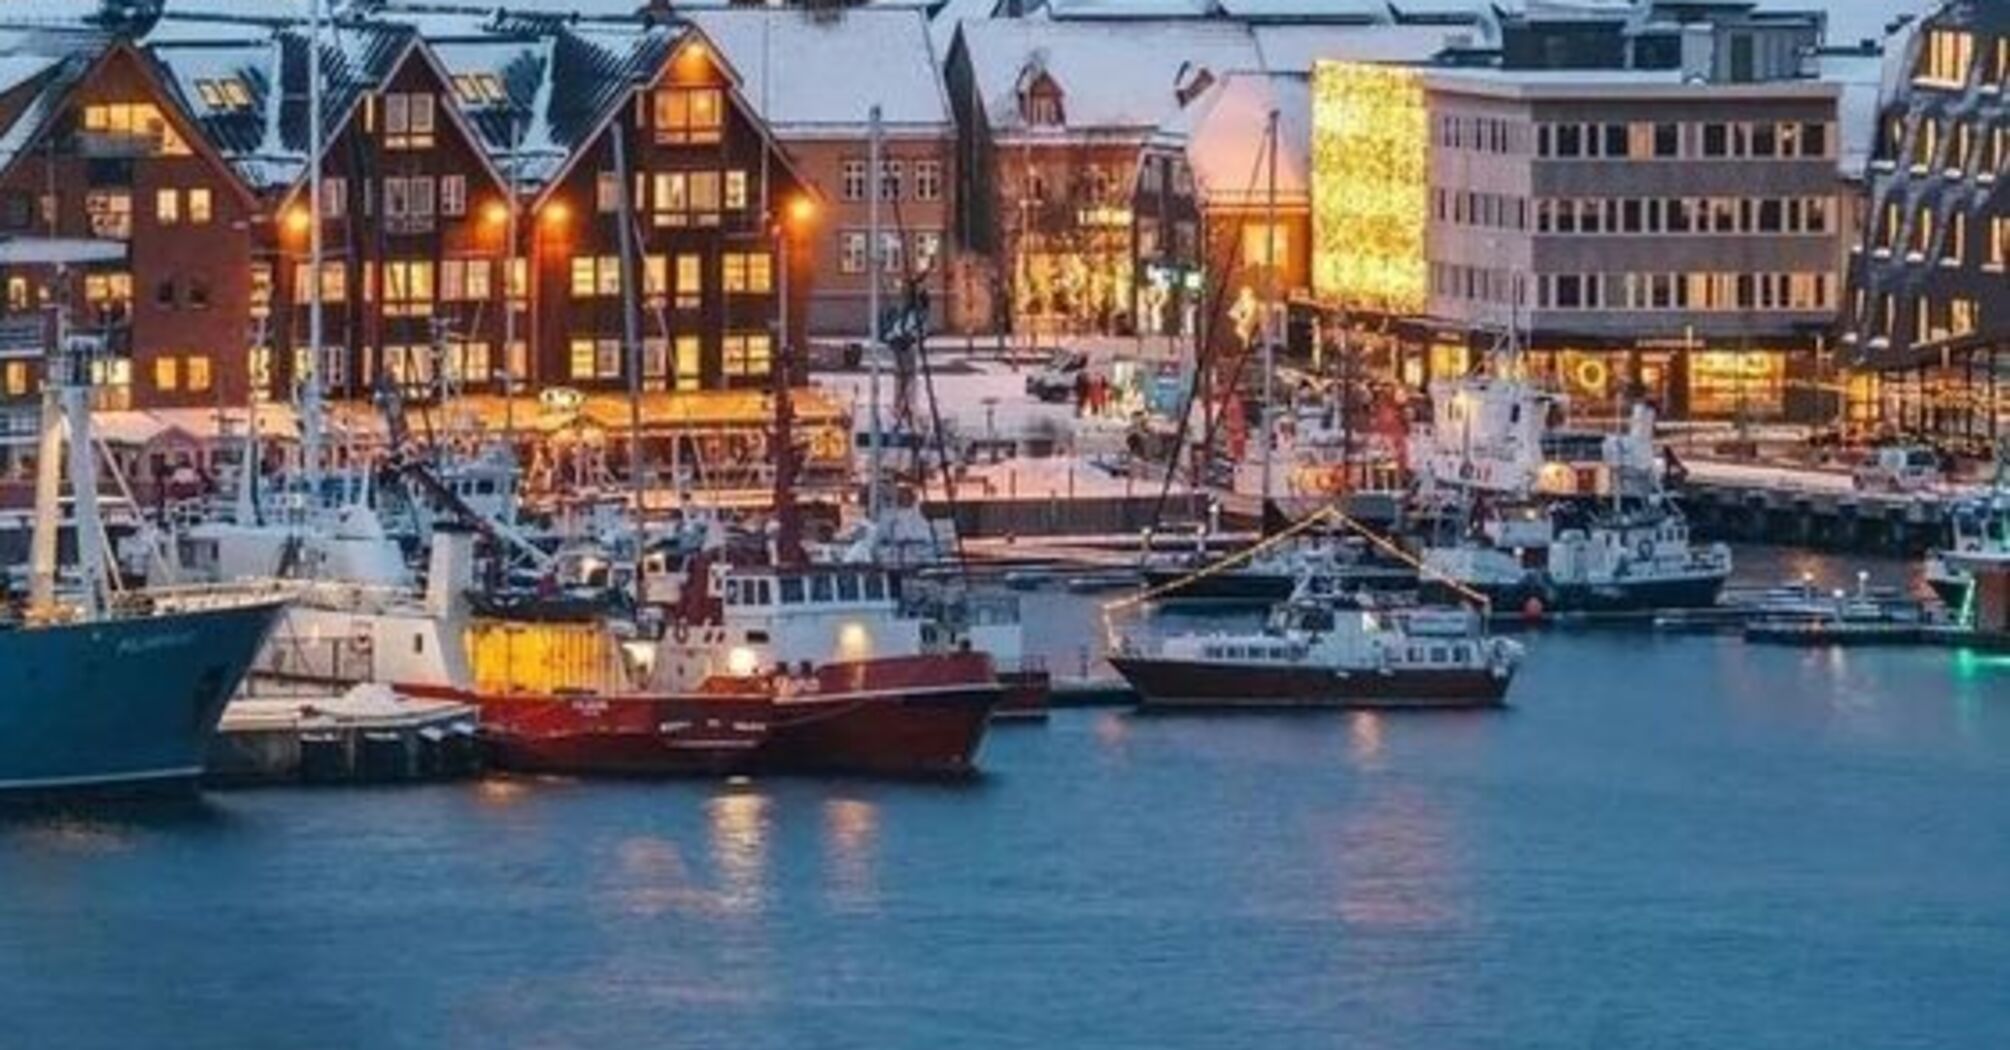 Magical Christmas City – a more affordable alternative to Lapland